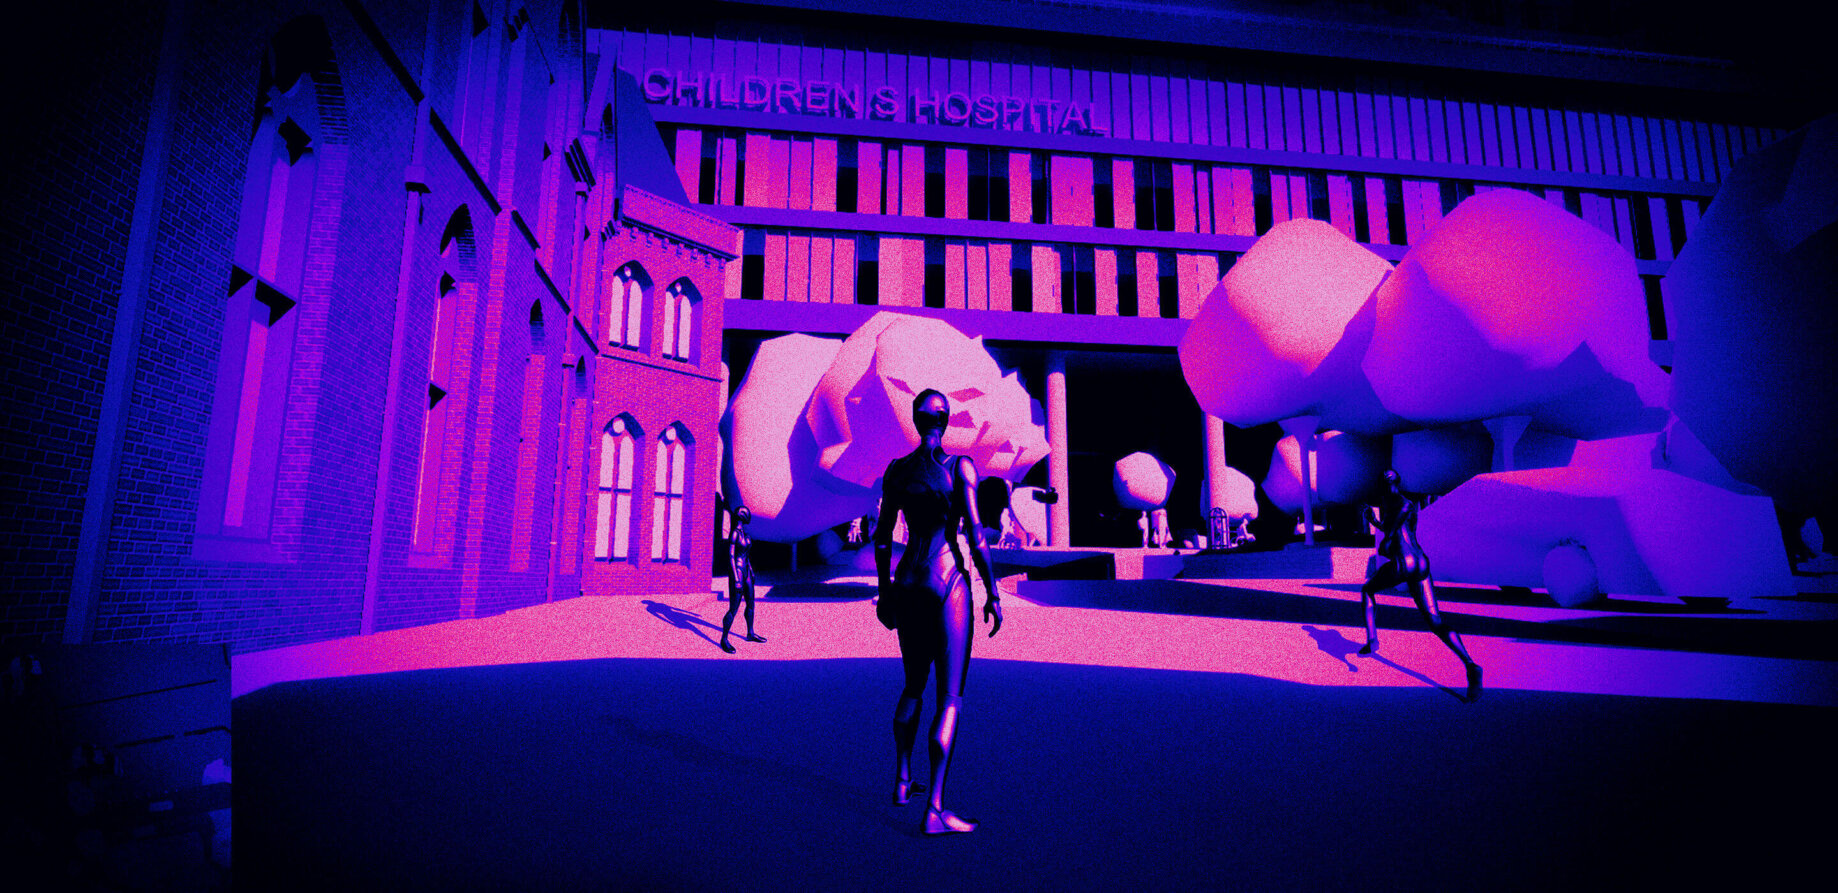 Artistic rendering of a scene in the metaverse